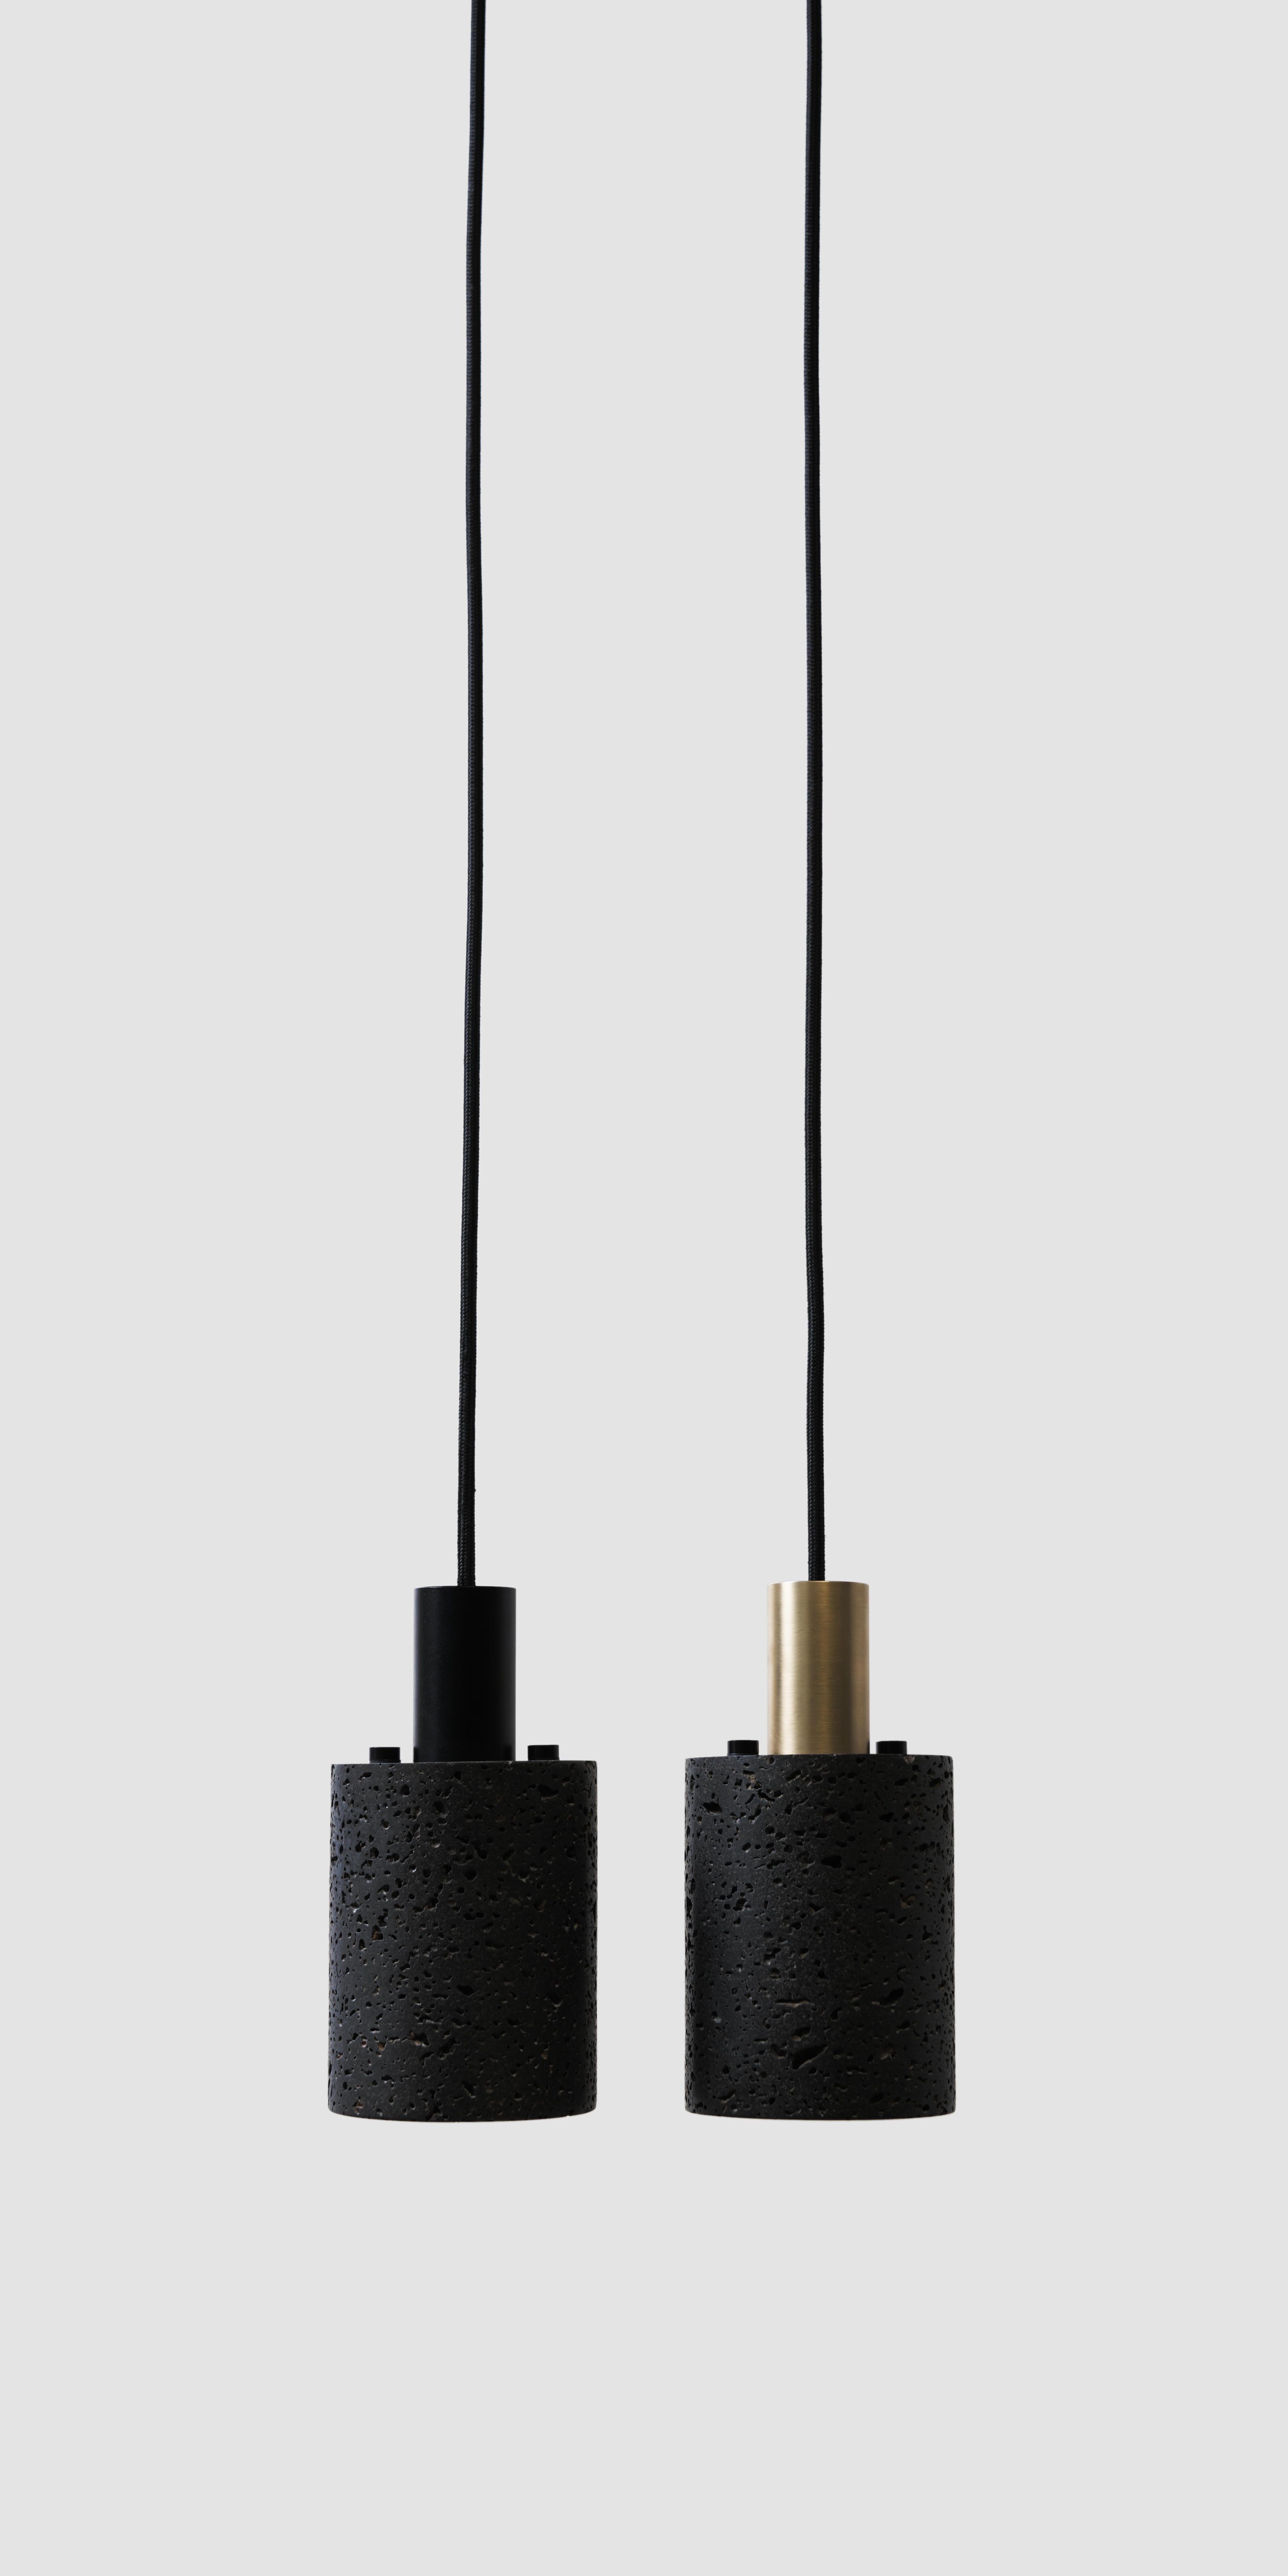 Material: Lava stone
Fittings: Brass
Color: Black
Dimension: 100 x 100 x 195 mm
Weight: 1.84 kg
Cord: 2950 mm
Light Source: LED E27
CCT: 3000-3500 K
CRI: 80-90 Ra
Flux: 230 lm
Supply: 86240 V
Wattage: 3 W, max 40 W

About the artist/